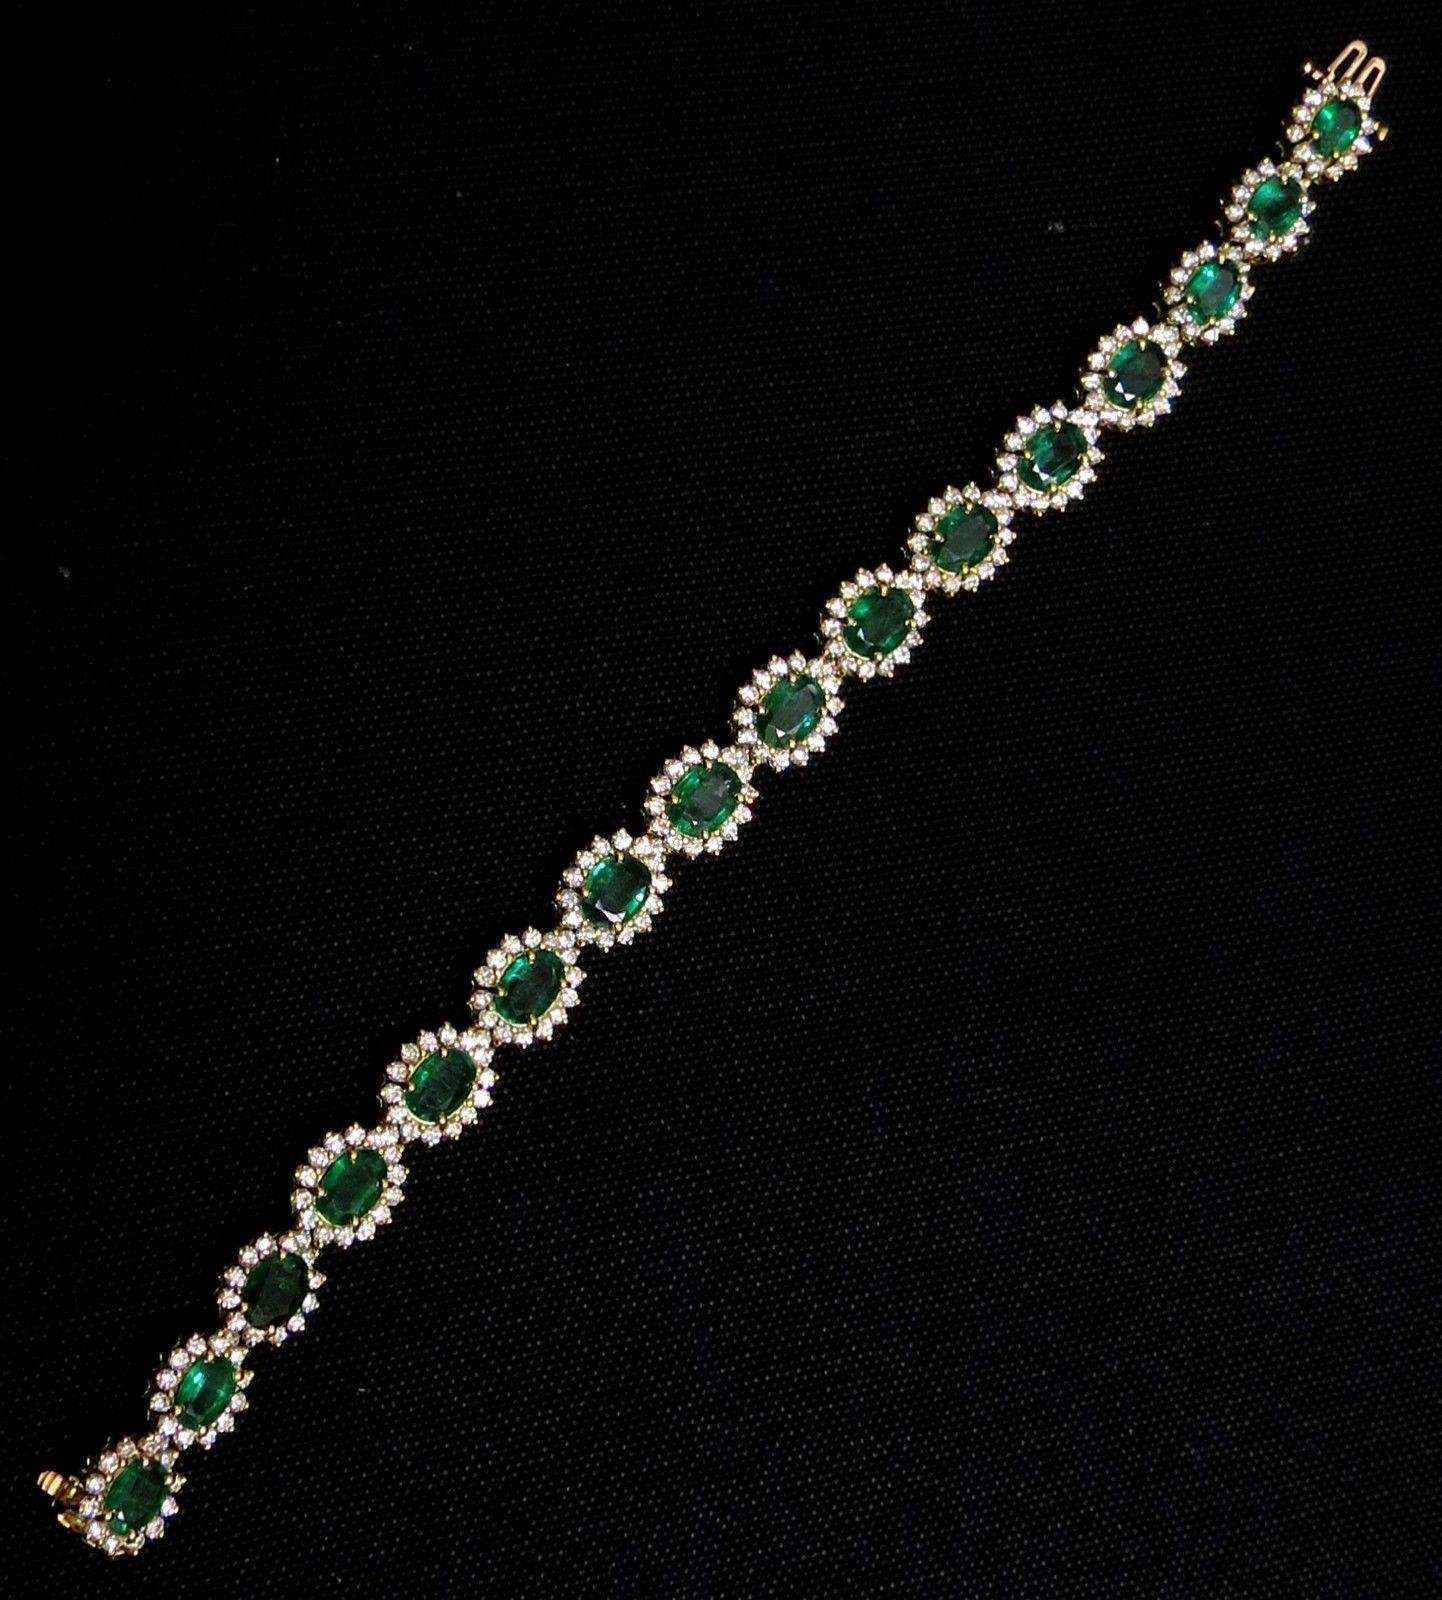 Royal Touch.

The Important Emerald Diamond bracelet.

21.26ct. Natural Fine Green Emeralds 

Oval Brilliant cuts & full faceted.

Clean Clarity

Vivid green Supreme sheen

Excellent Transparency.

All of Zambian Origin

Range 9.1 X 6.5mm - 7.6 X